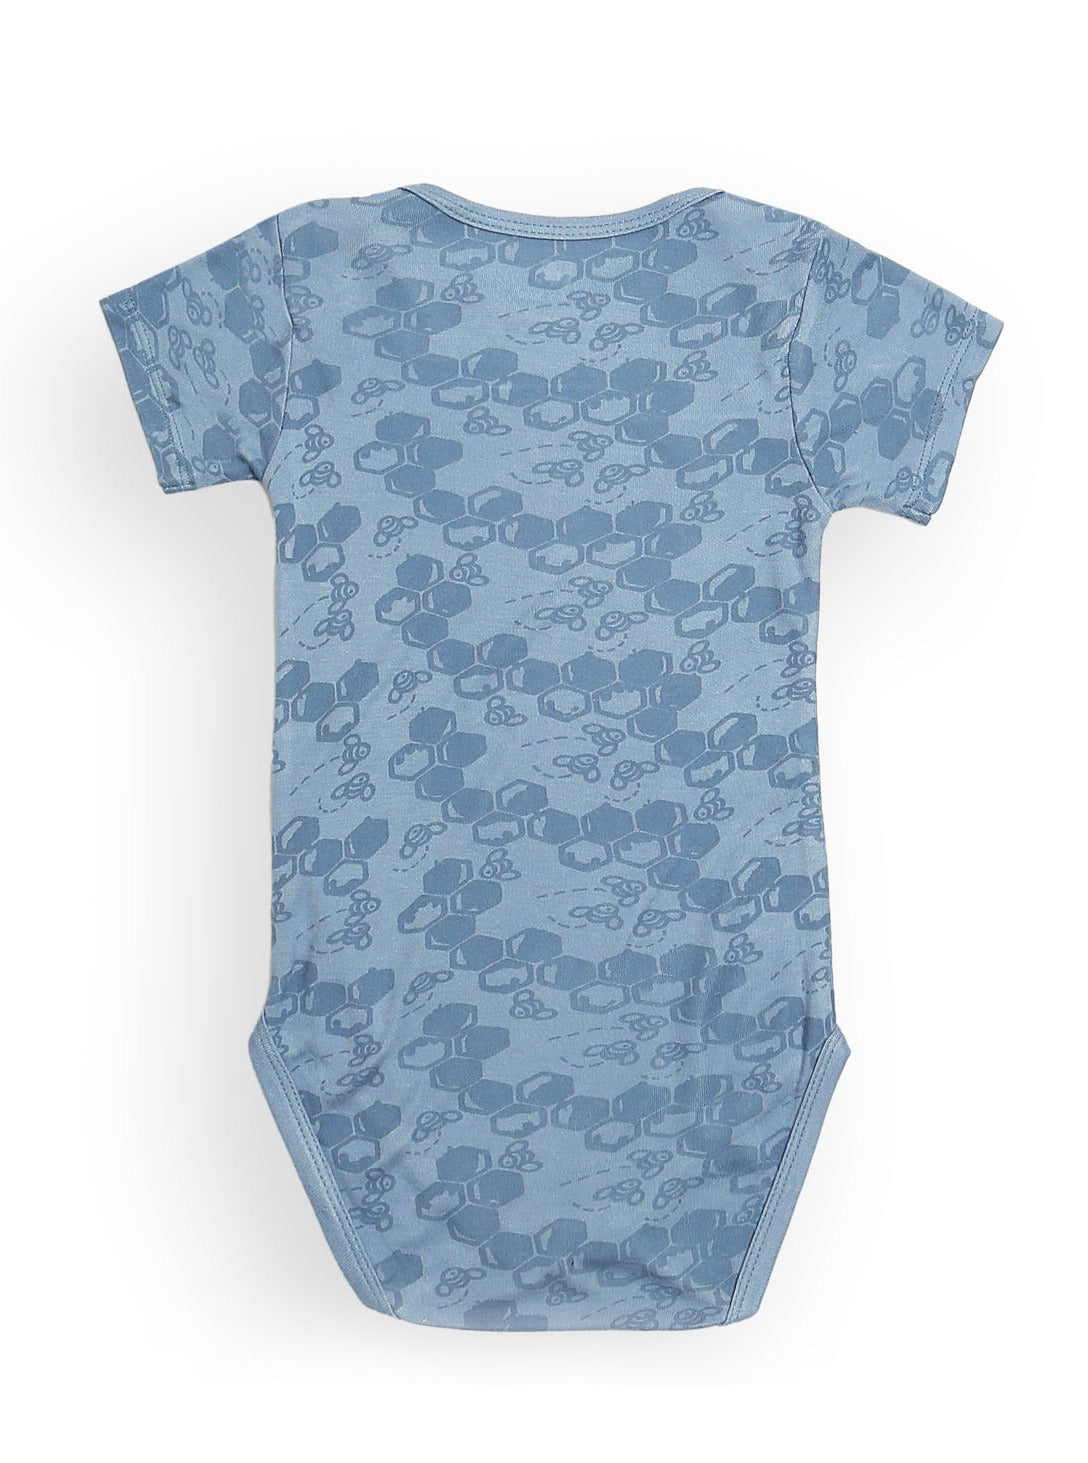 MIKO LOLO Shizy Blue Unisex Onesie | kids Fashion | The Green Collective SG